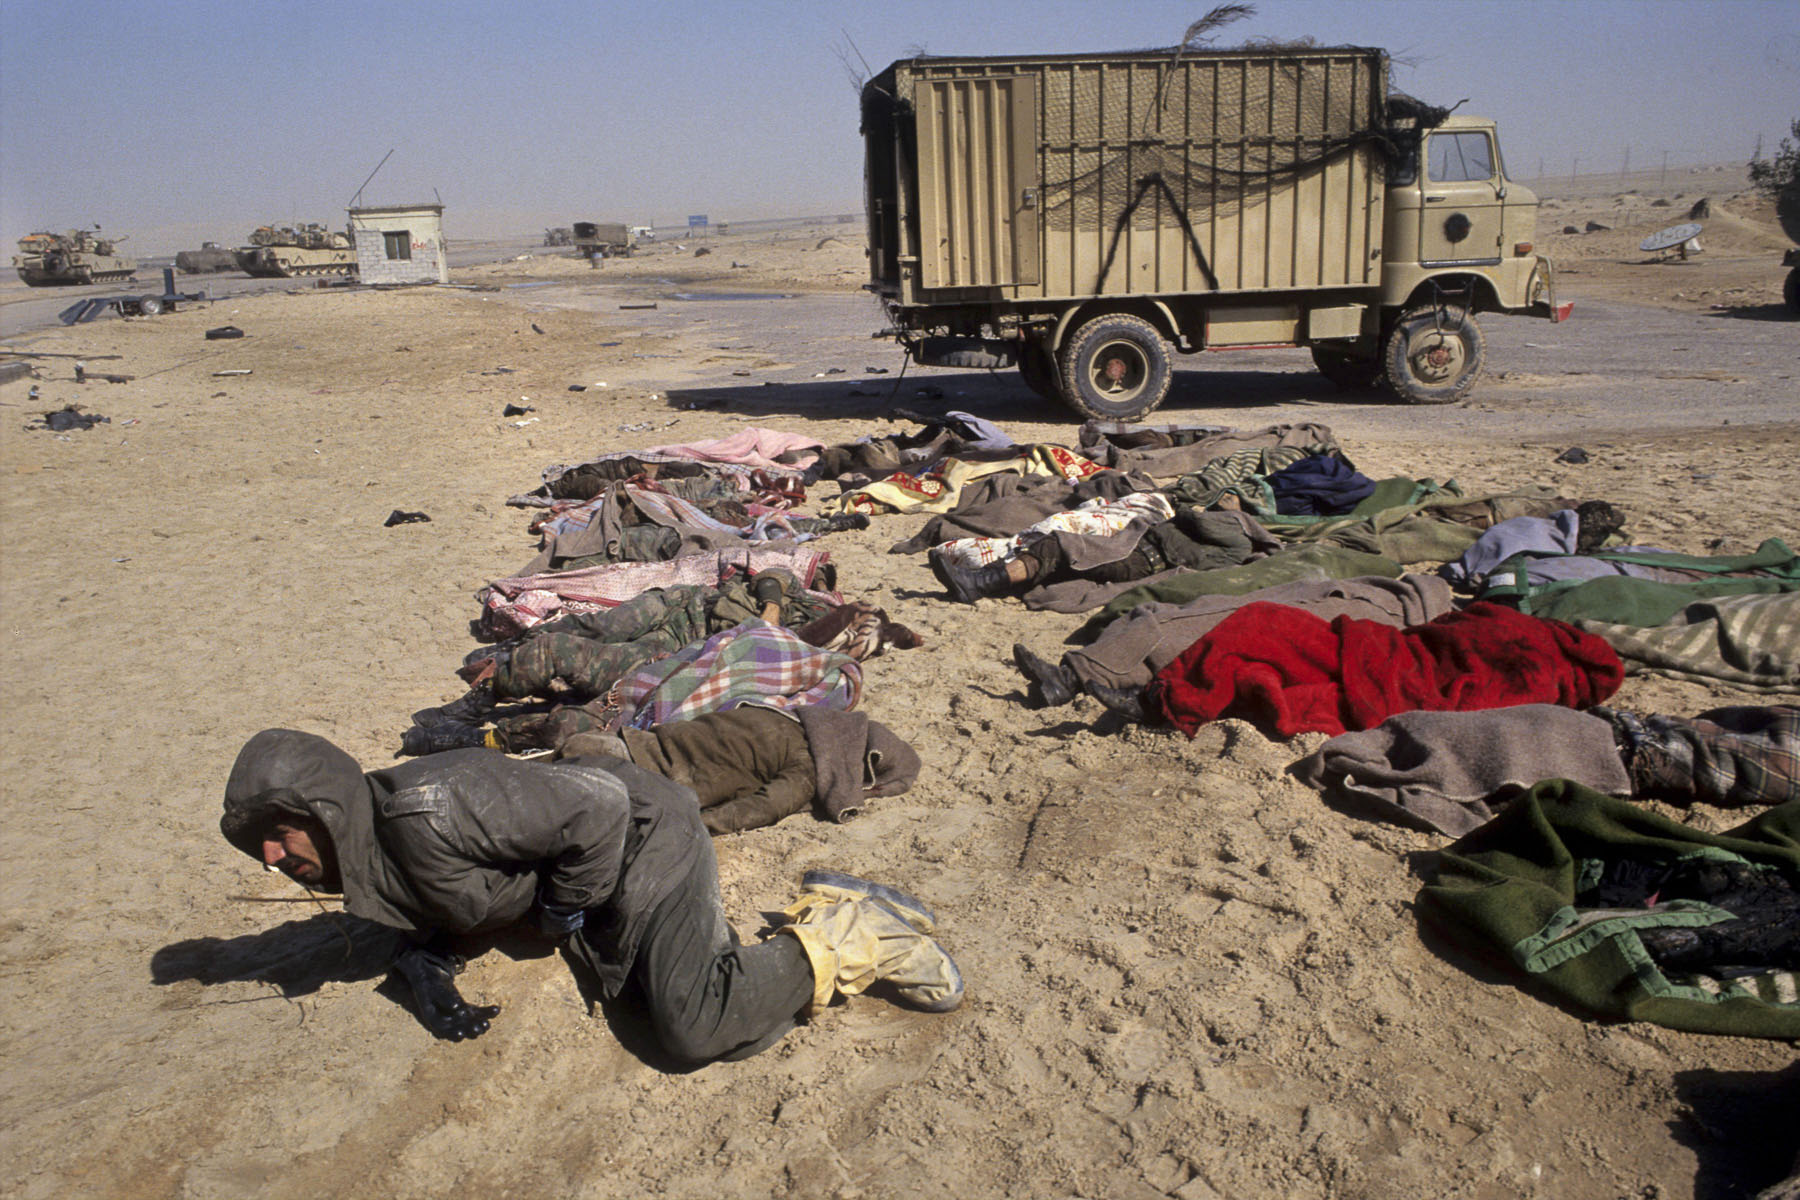 An Iraqi prisoner cries by his friends’ corpses on the road to Basra in February 1991